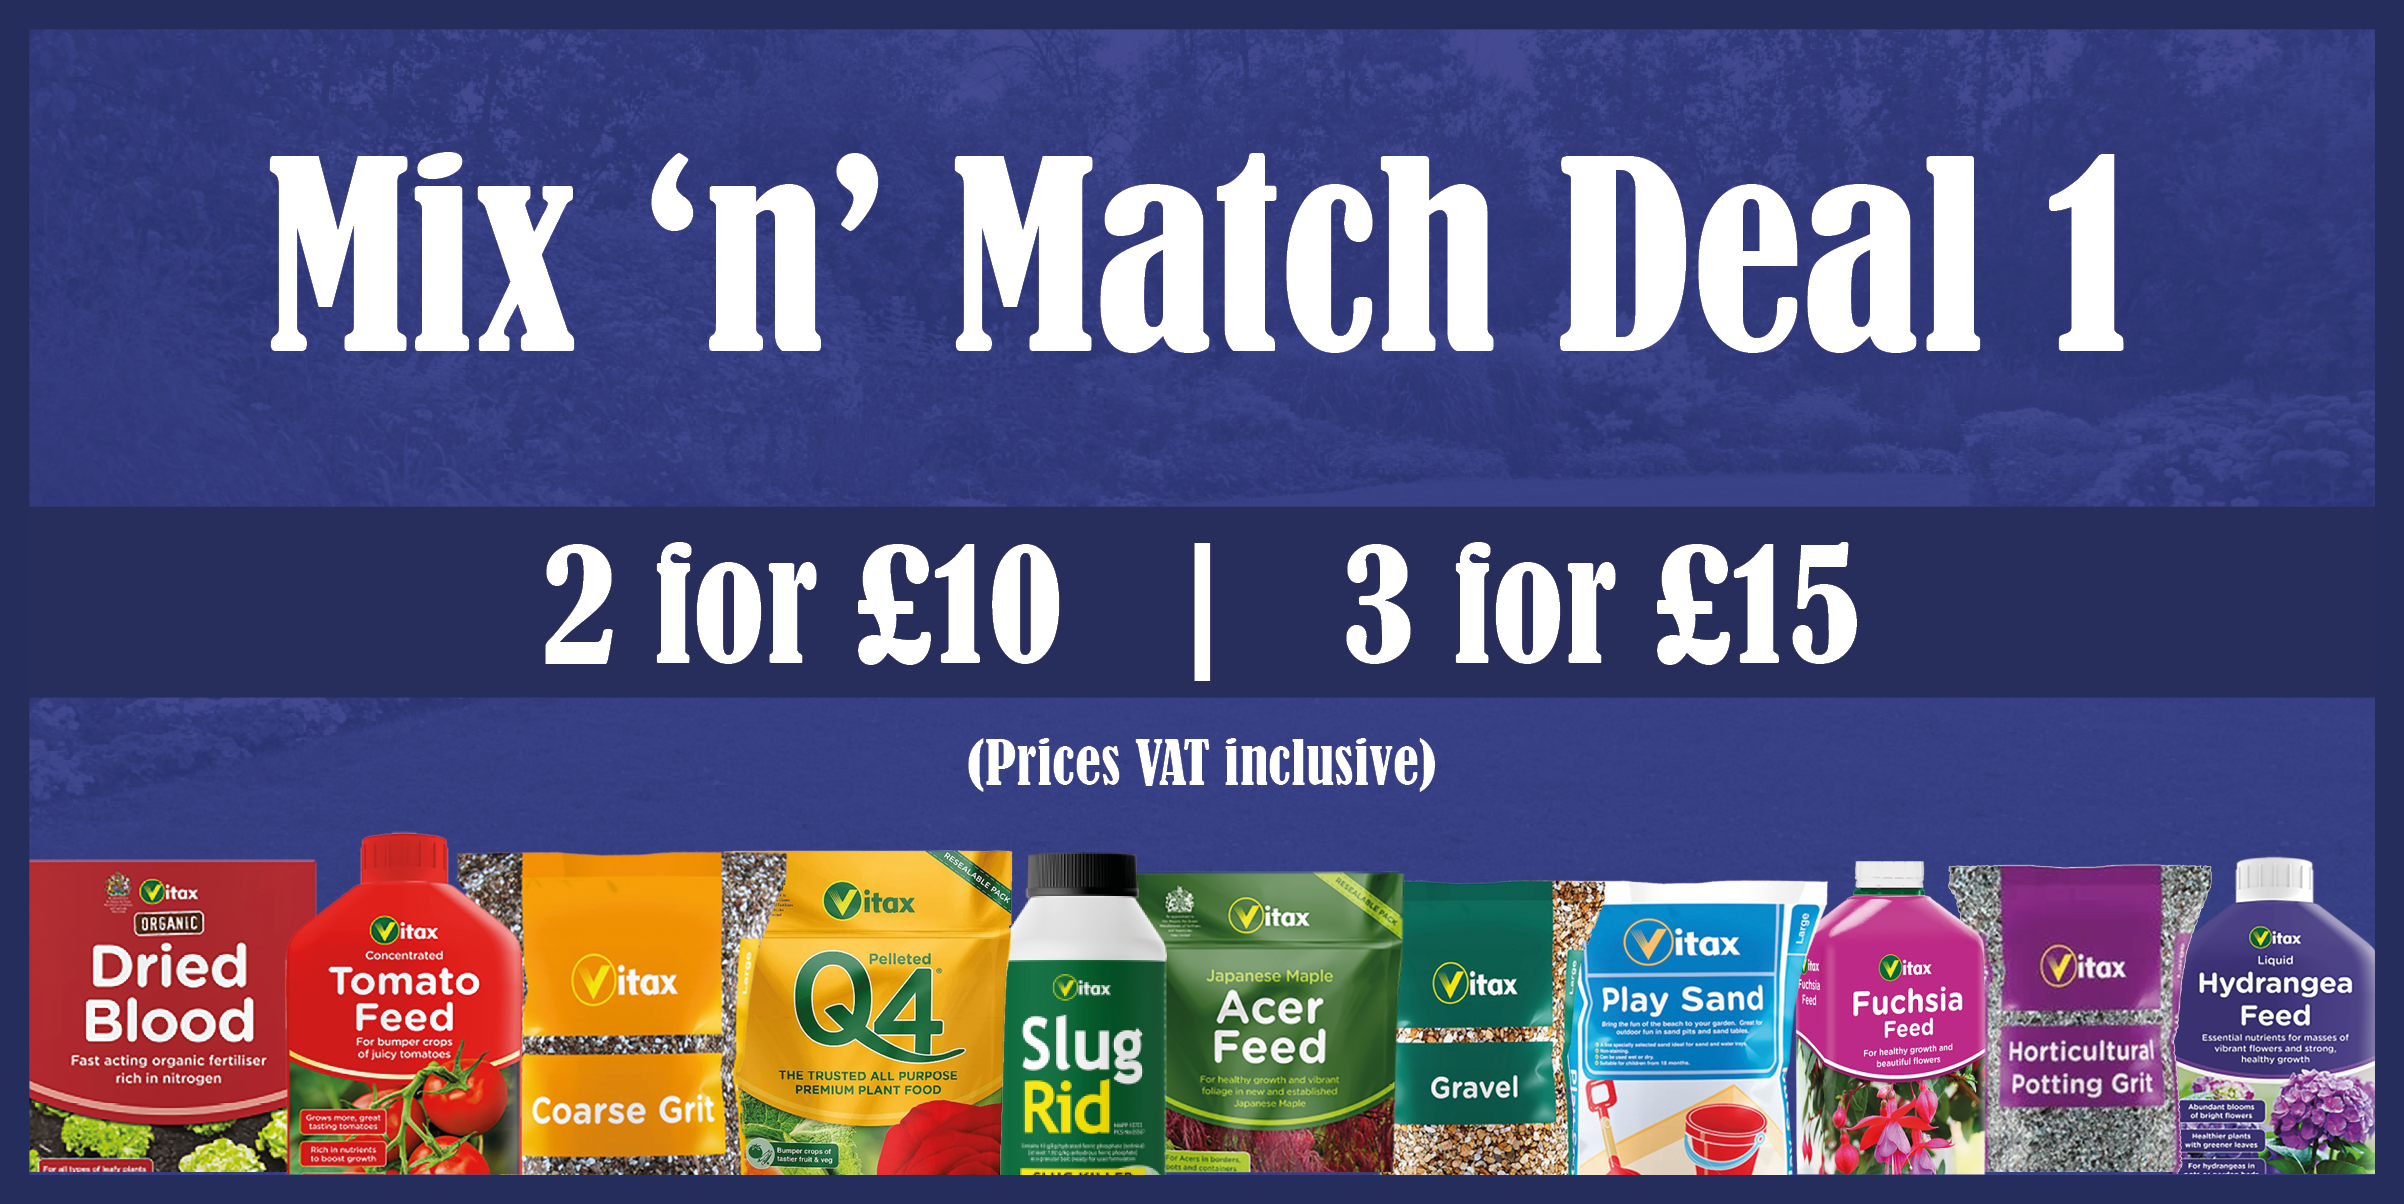 Mix and Match Deal 1